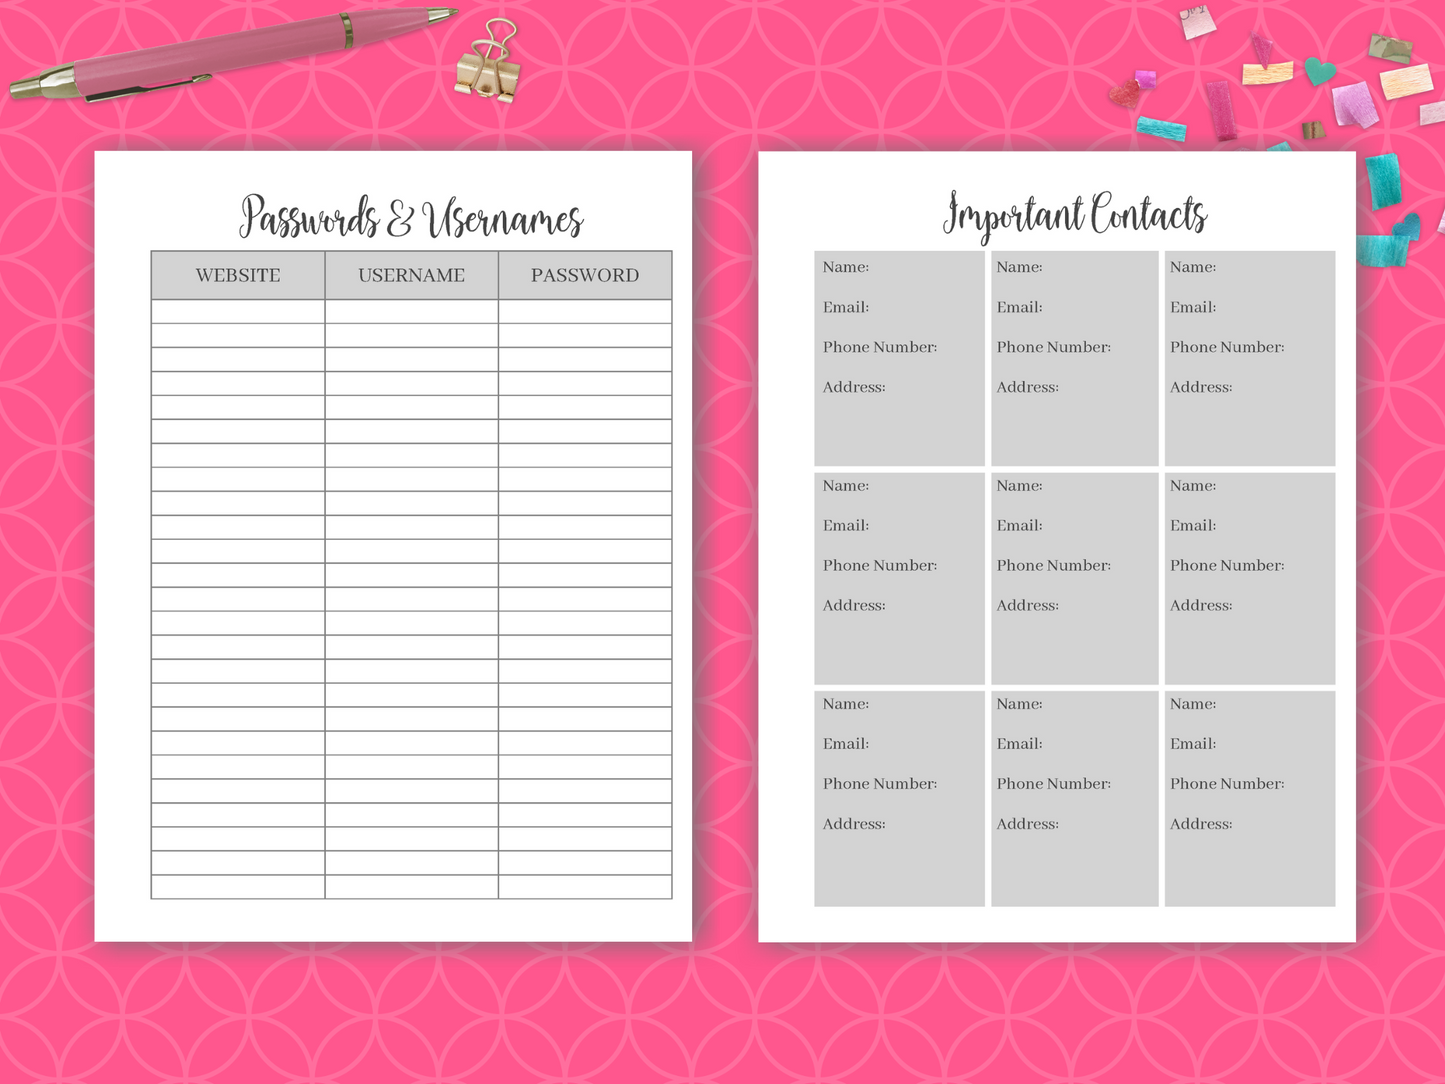 Printable 8.5x11 Black and White Day Planner